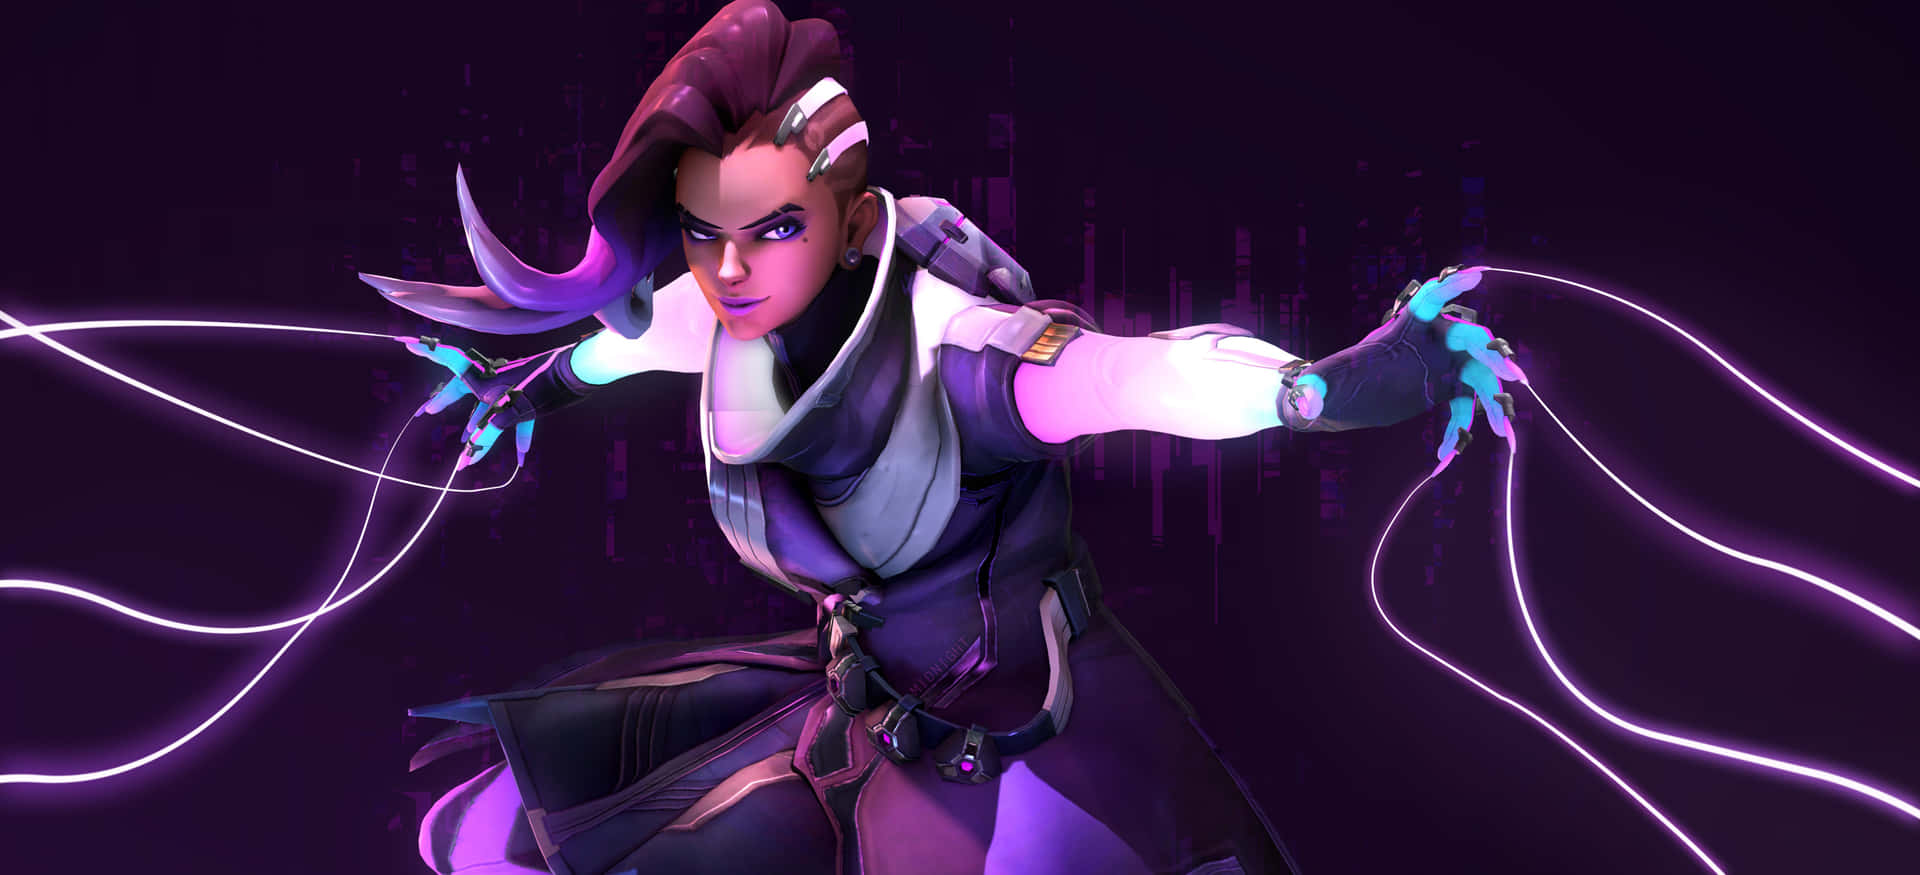 Sombra from Overwatch: Ready for Action Wallpaper